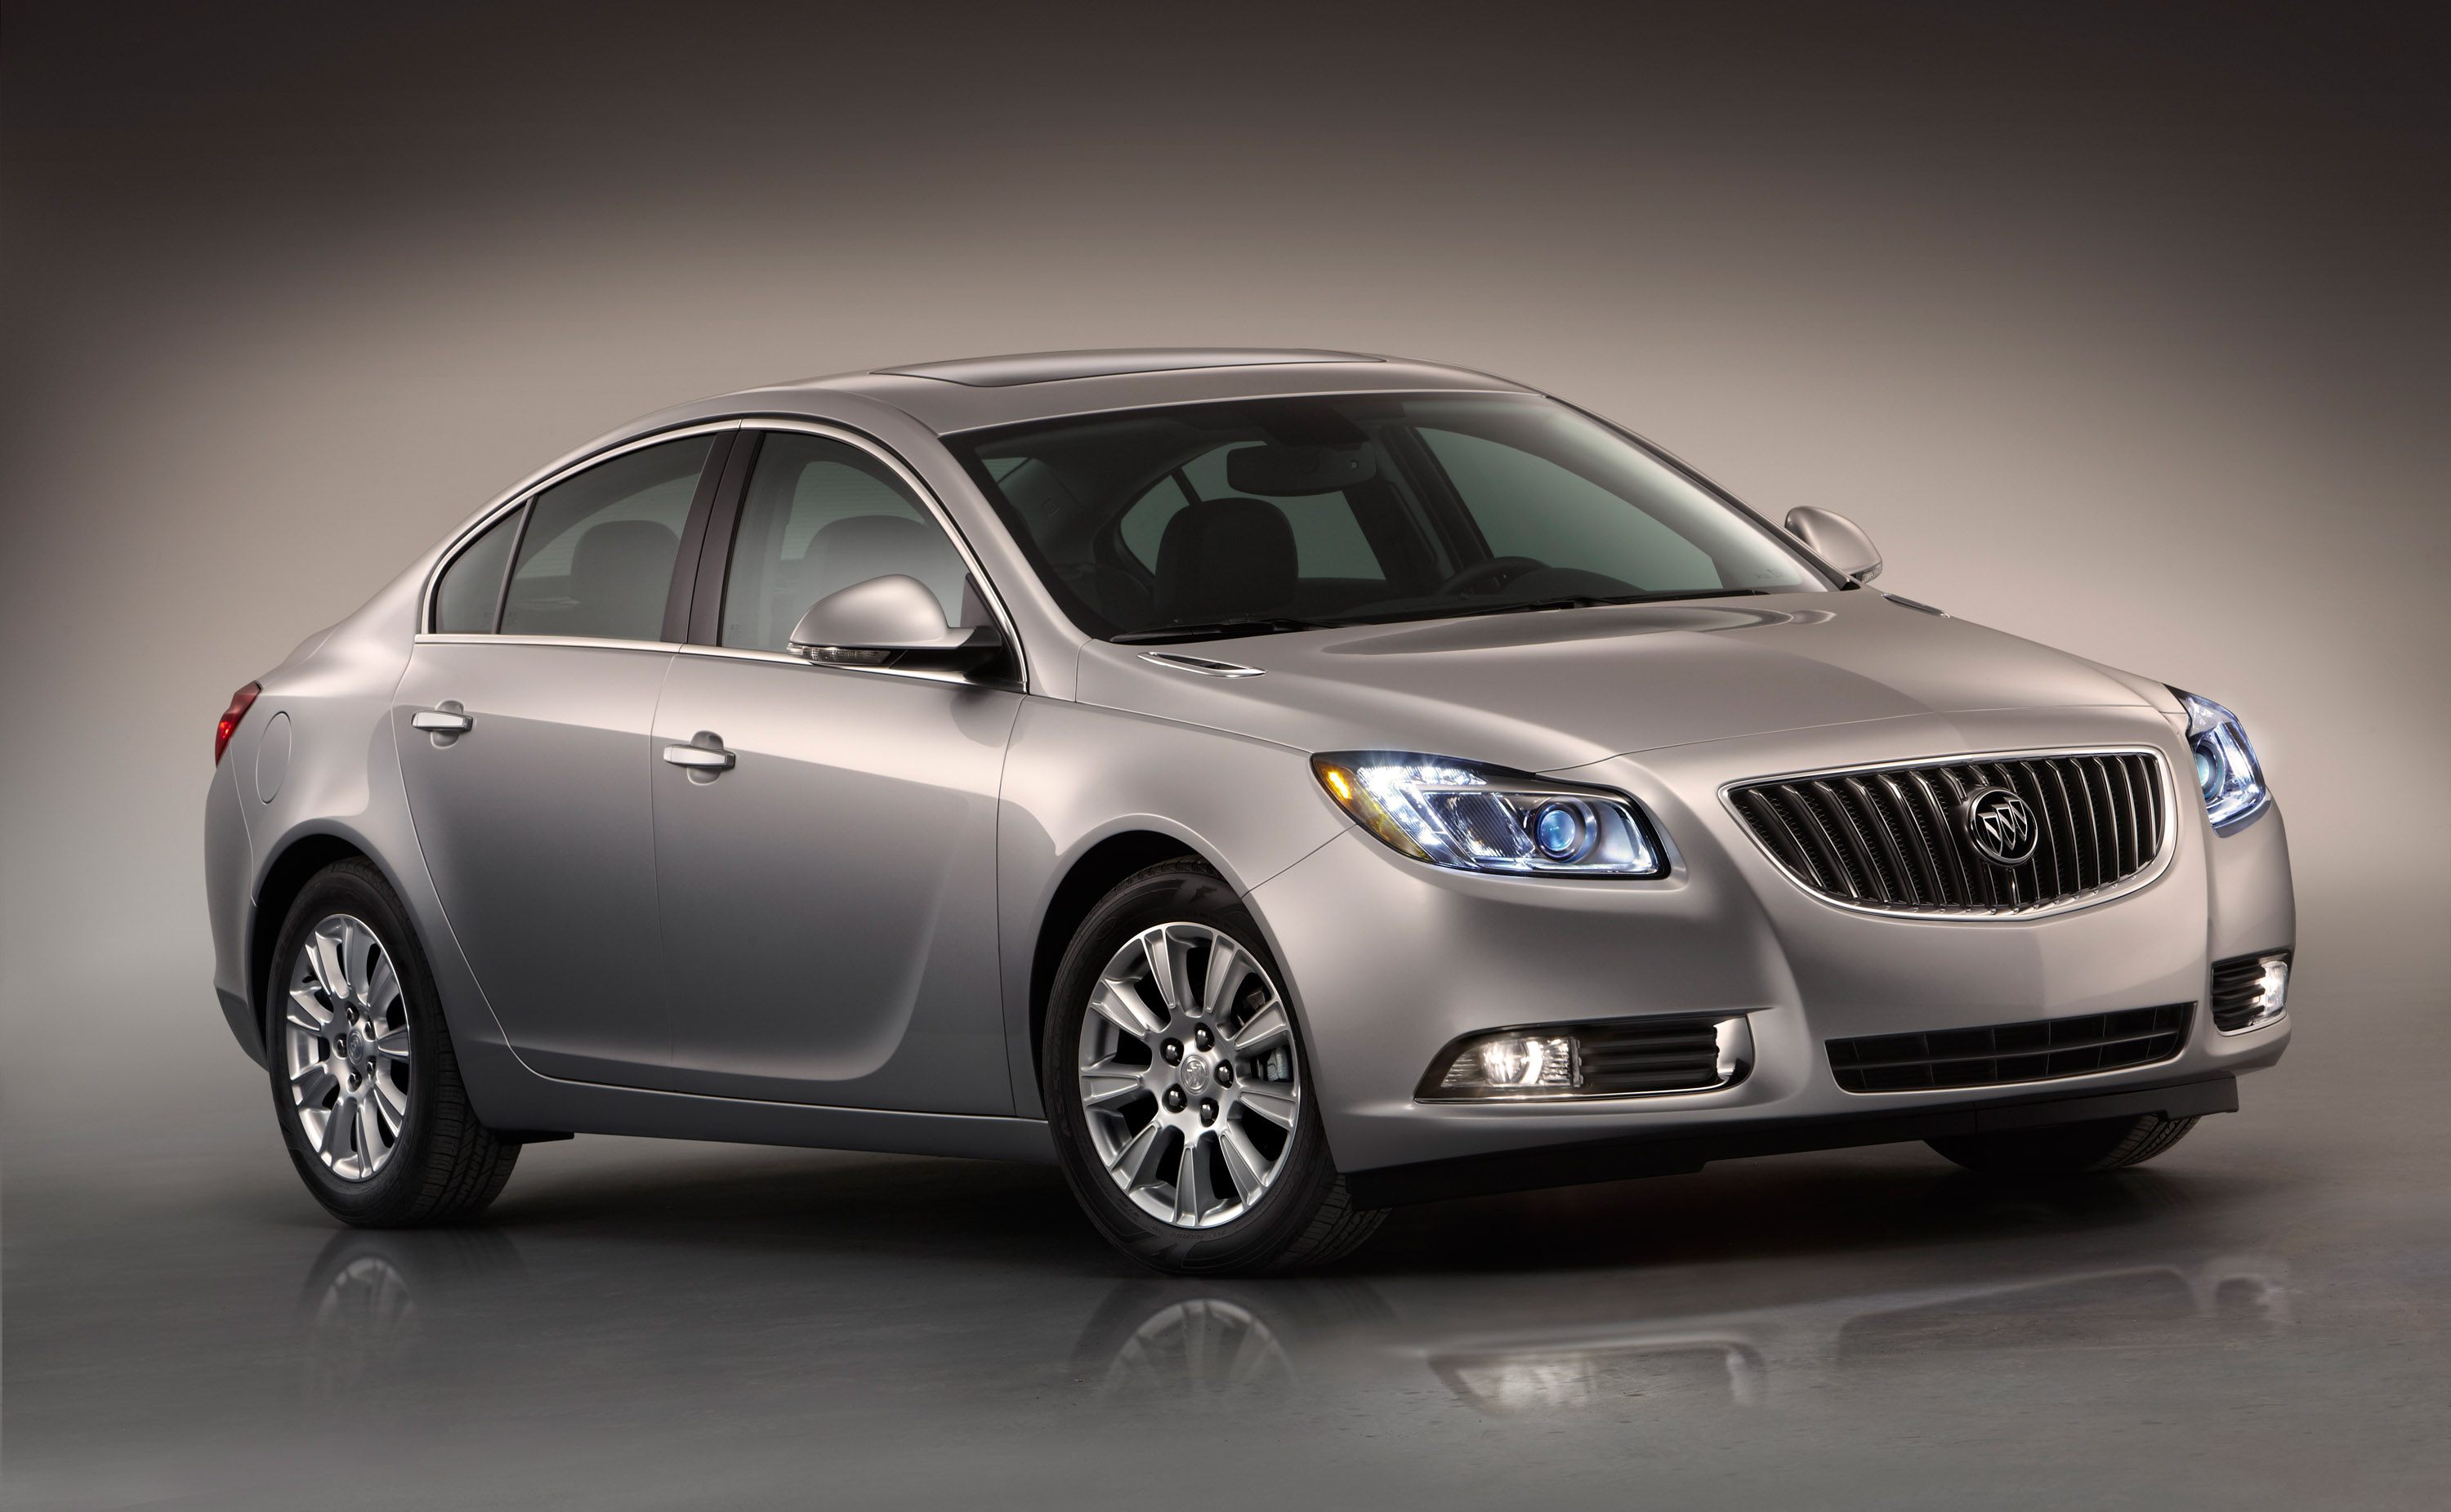 Buick Regal with eAssist